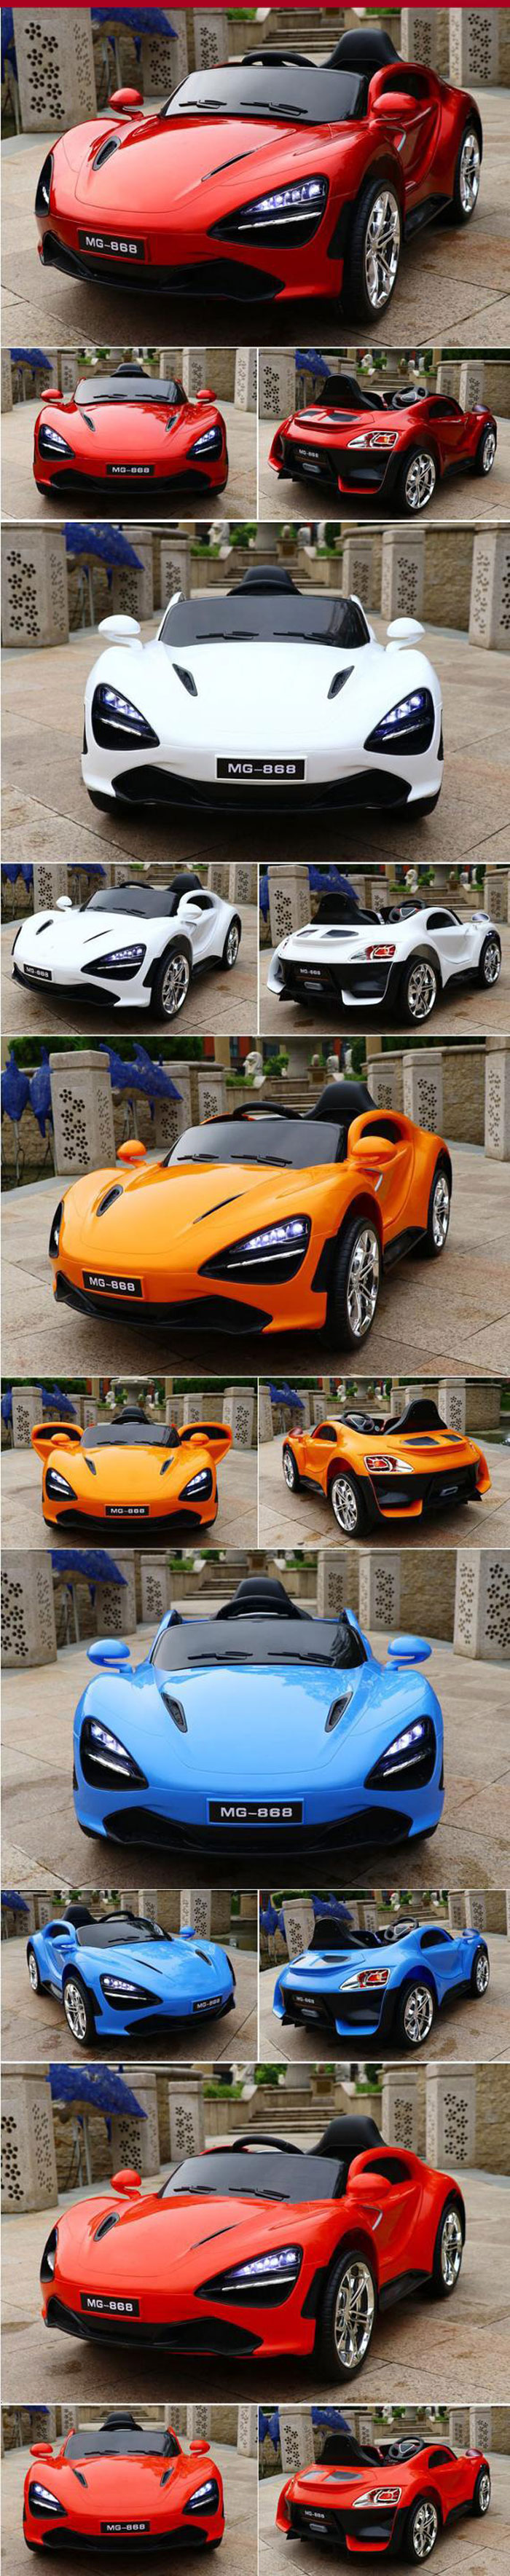 Four Wheels With Suspension Electric Toy Car 6V Double Battery and Drive Electric Toy Car